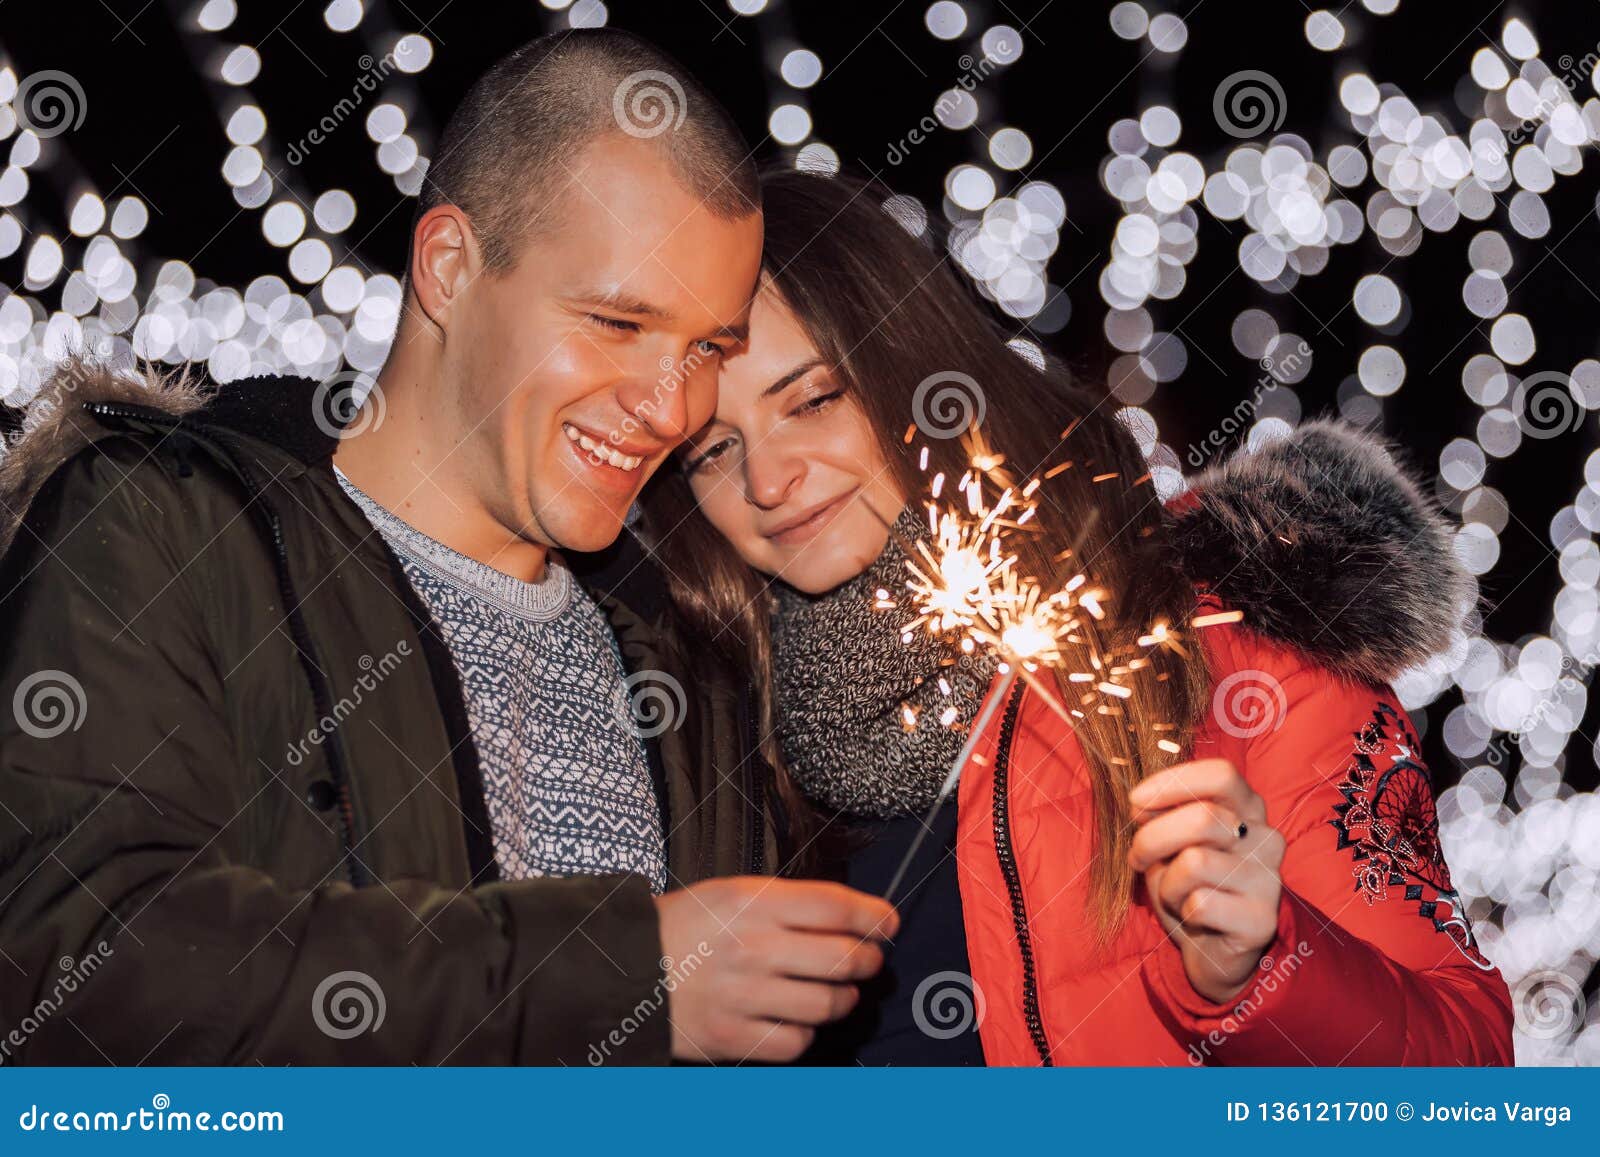 Young Happy Couple Having Fun With Sparklers Stock Photo Image Of